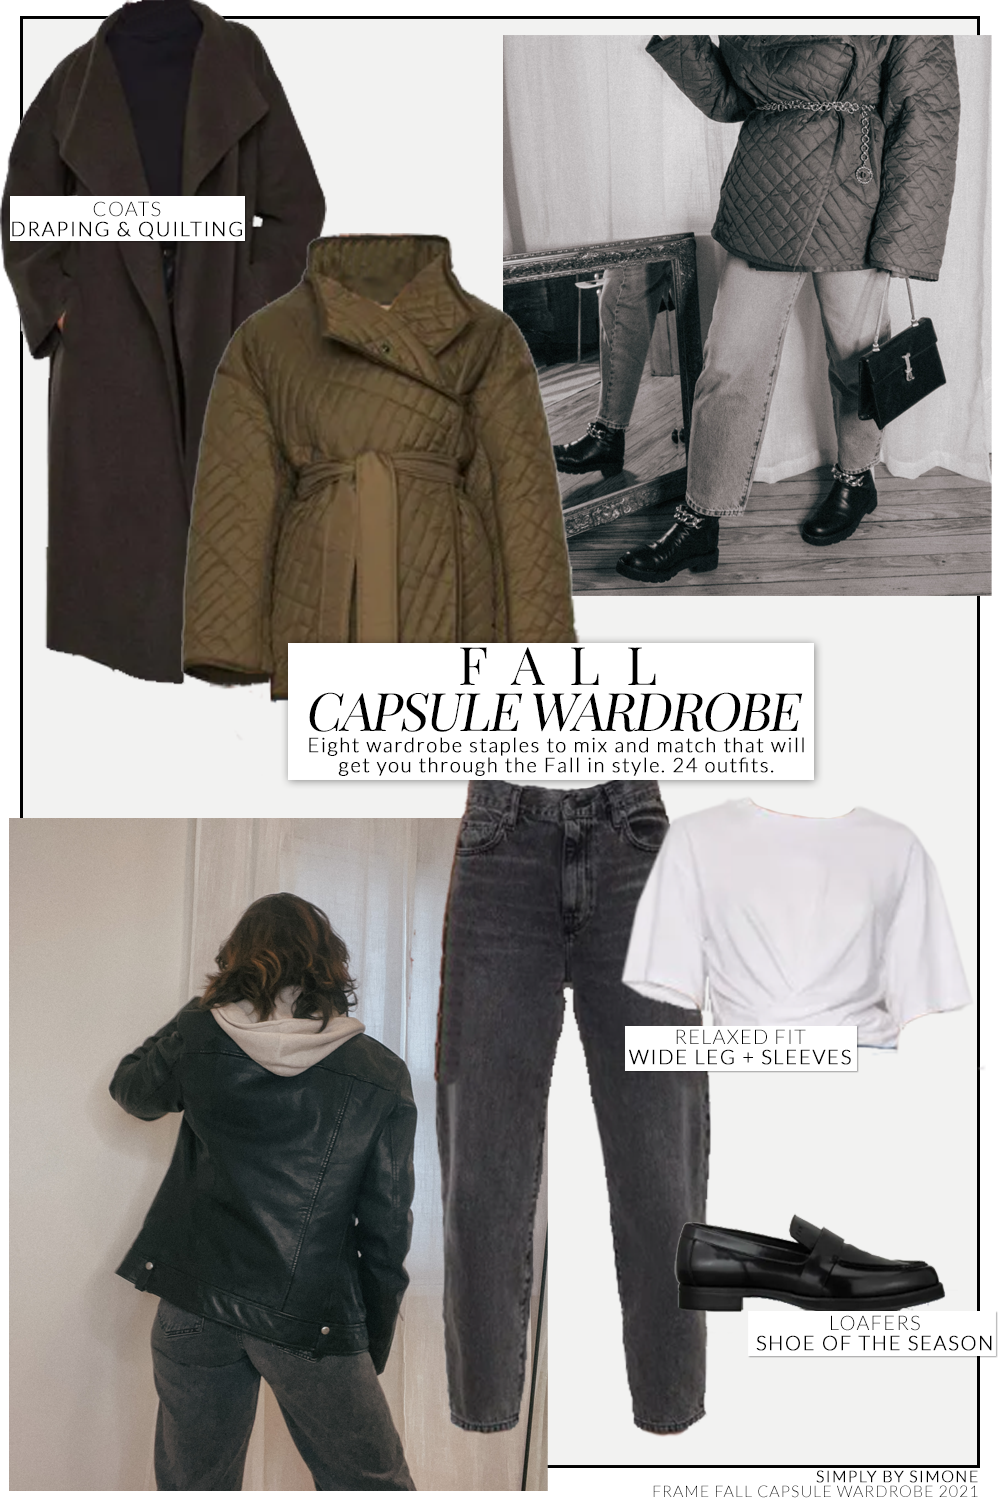 Frame Fall Capsule Wardrobe – 8 Pieces, 24 Outfits for Fall